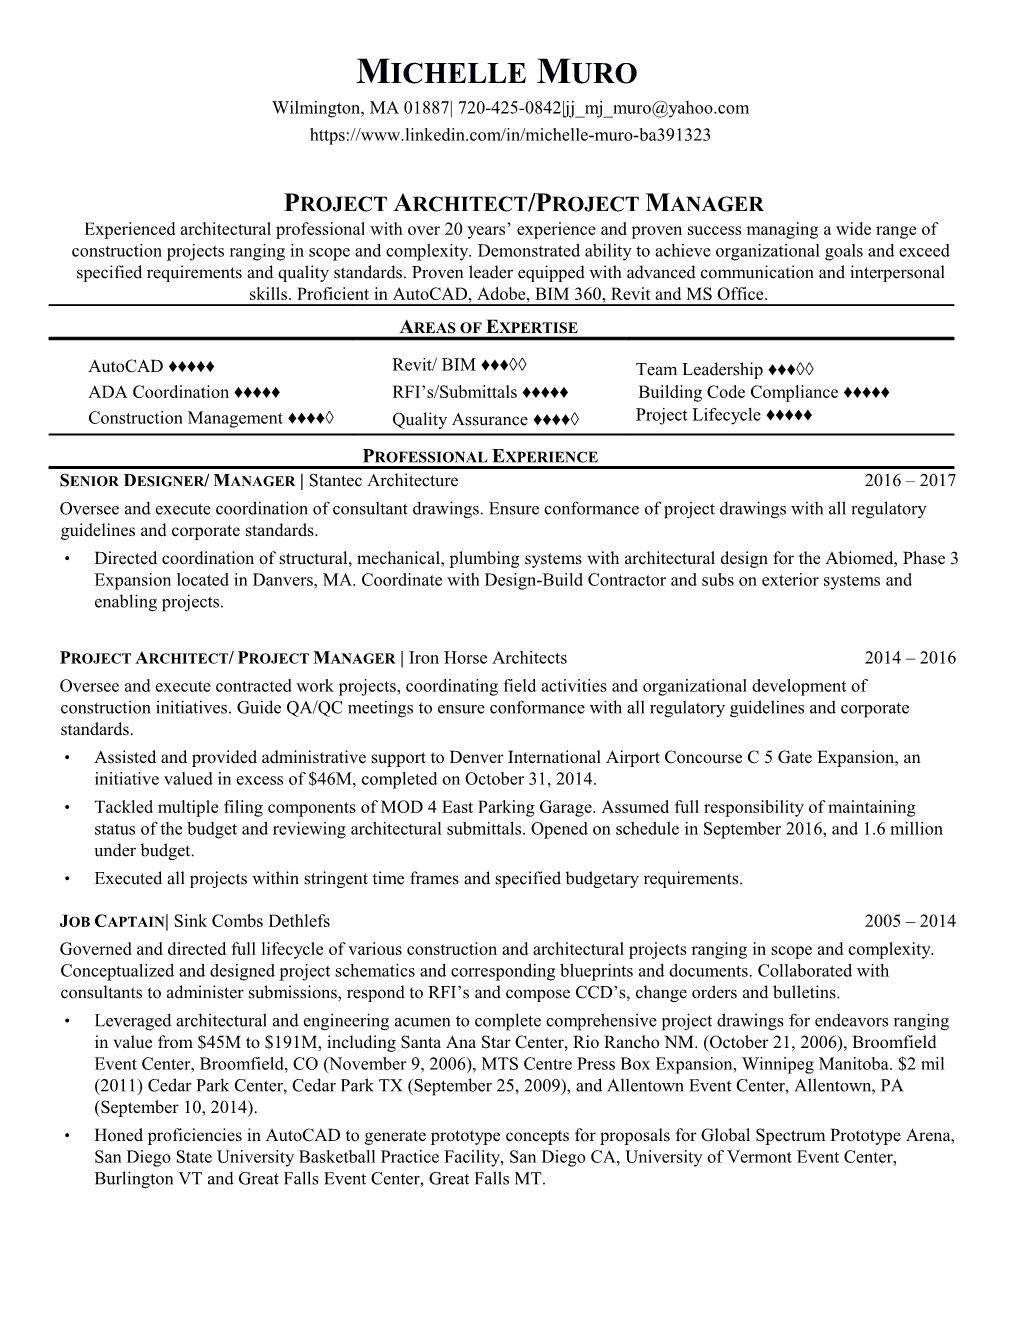 Project Architect/Project Manager